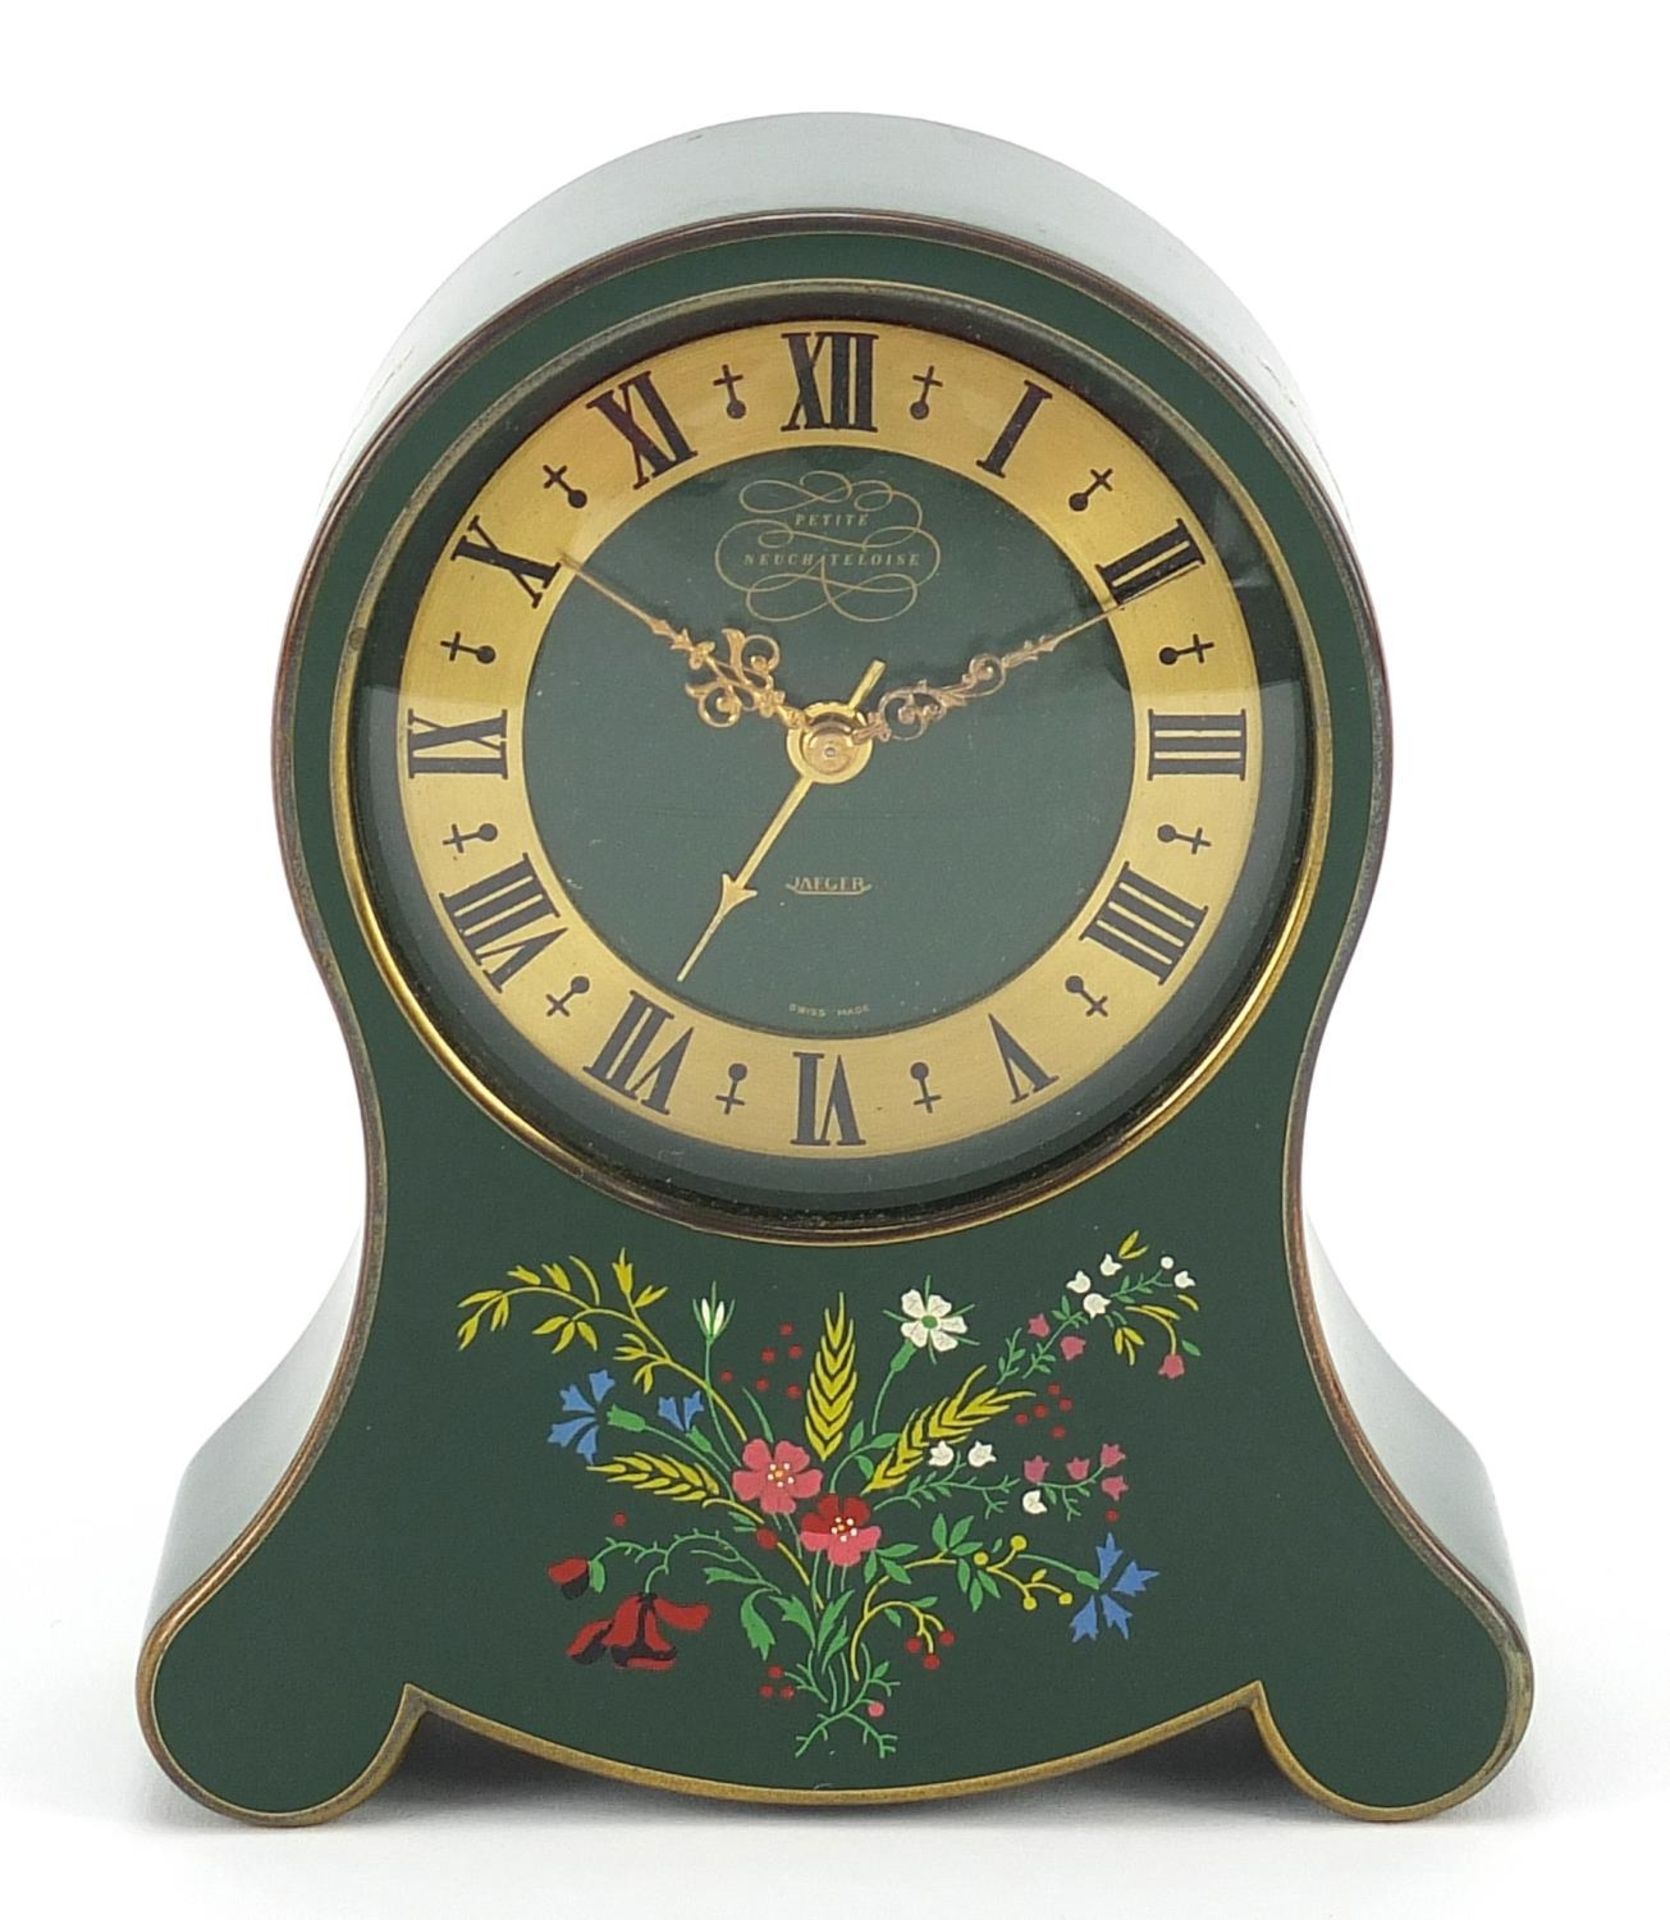 Jaeger LeCoultre Petite Neuchateloise alarm clock decorated with flowers, 12cm high